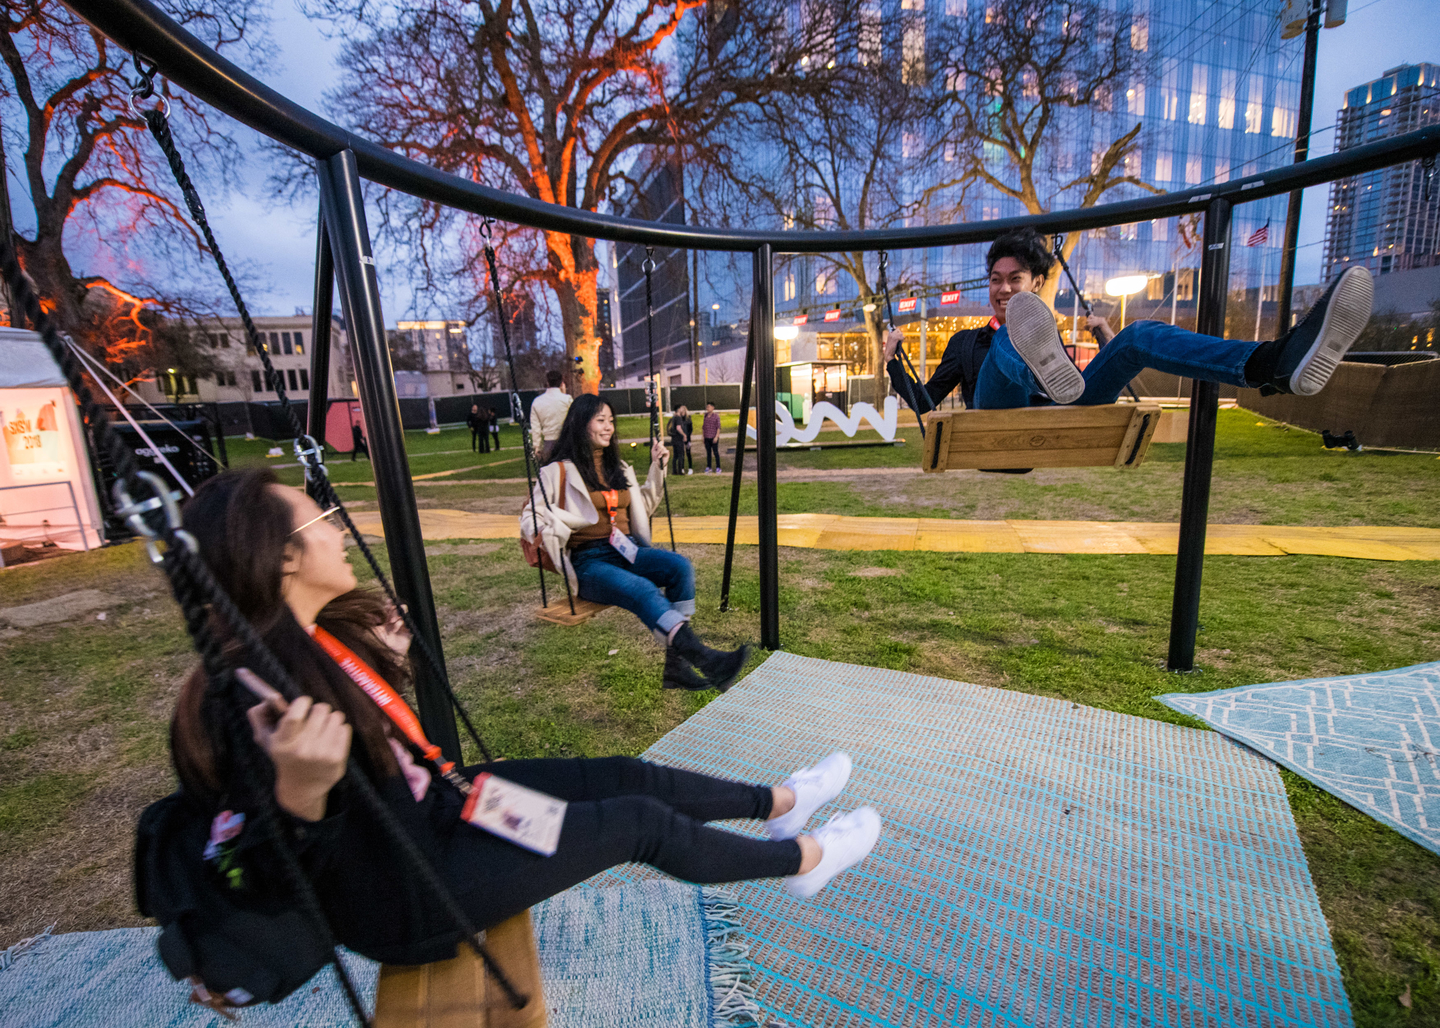 Swingsets and much more can be found at “Palm Park - presented by Mercedes-Benz & smart.” Palm Park has a variety of things to check out through Friday, March 15.